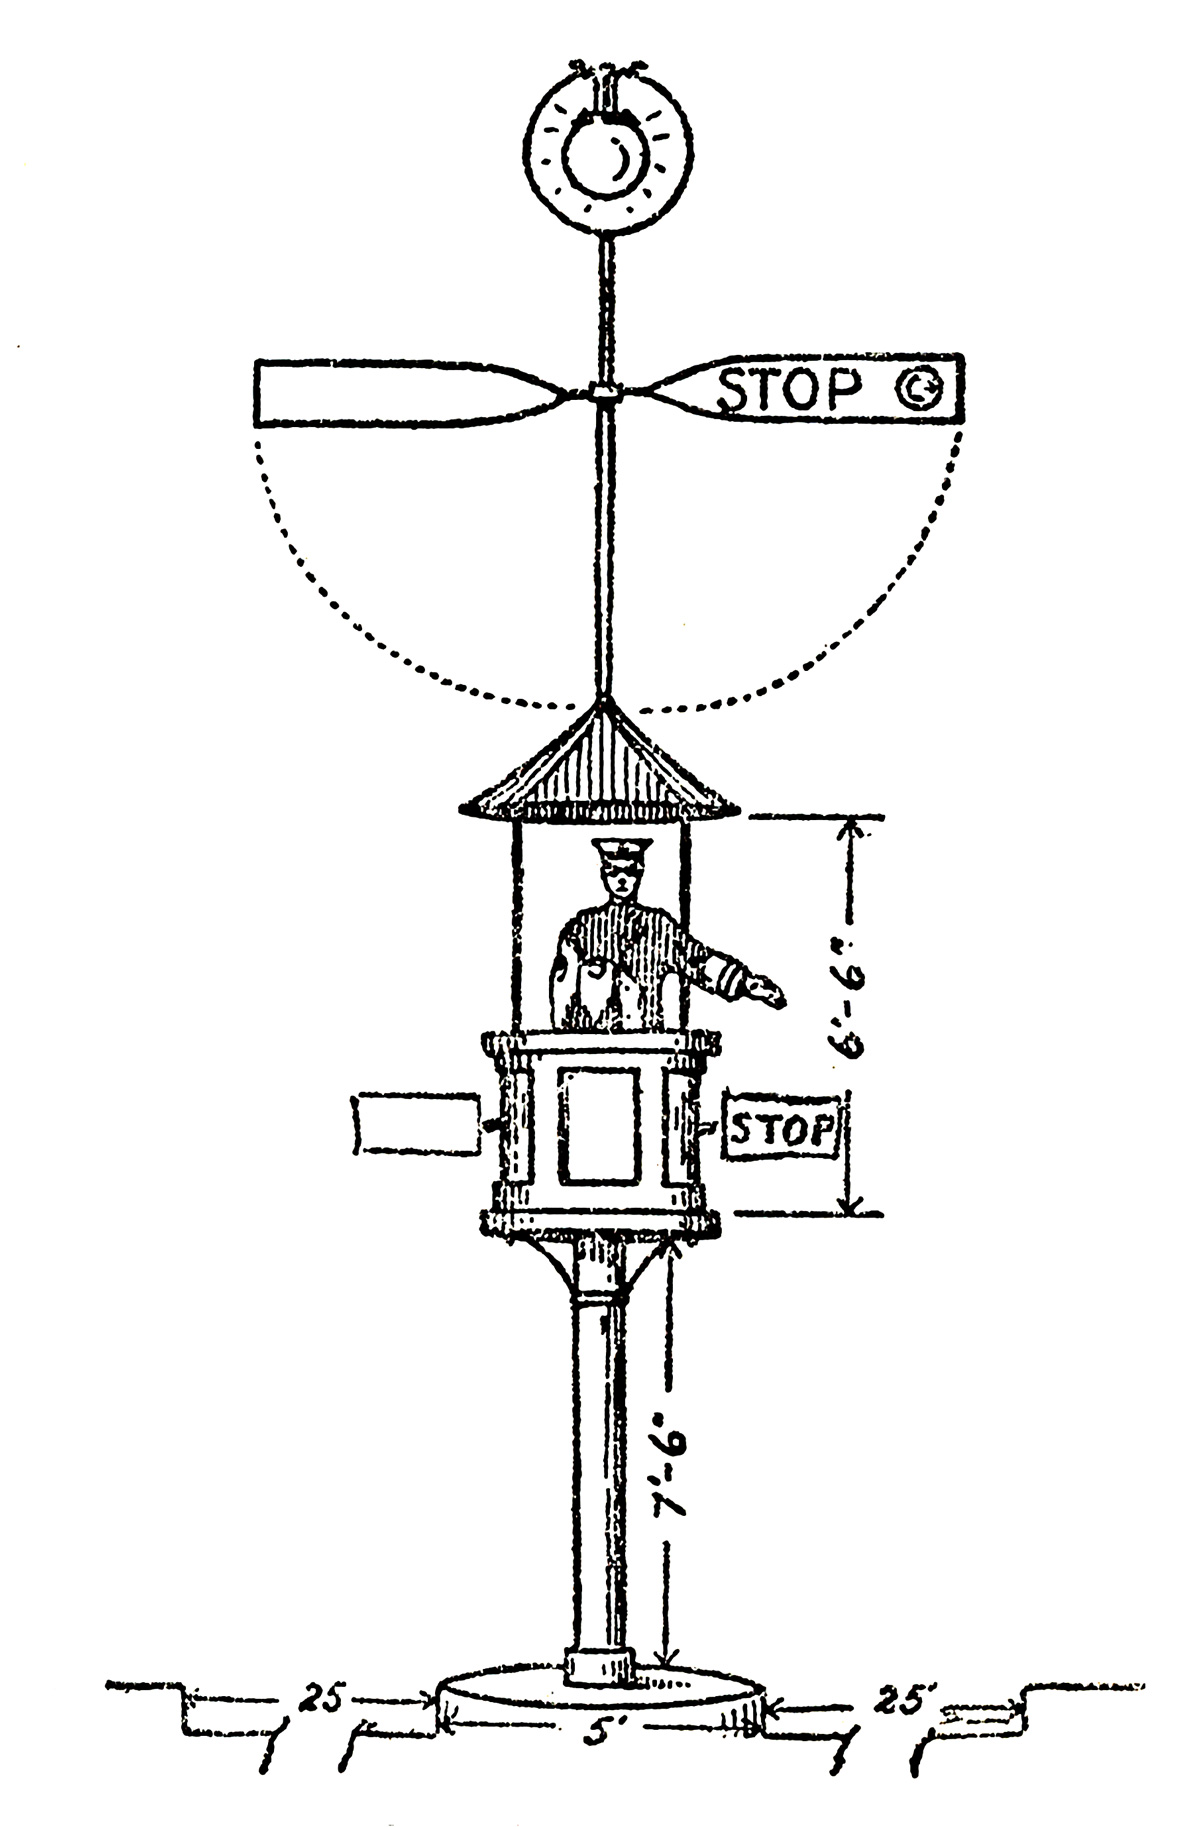 A diagram of a circa 1915 crow’s nest, an elevated manned traffic control signal.